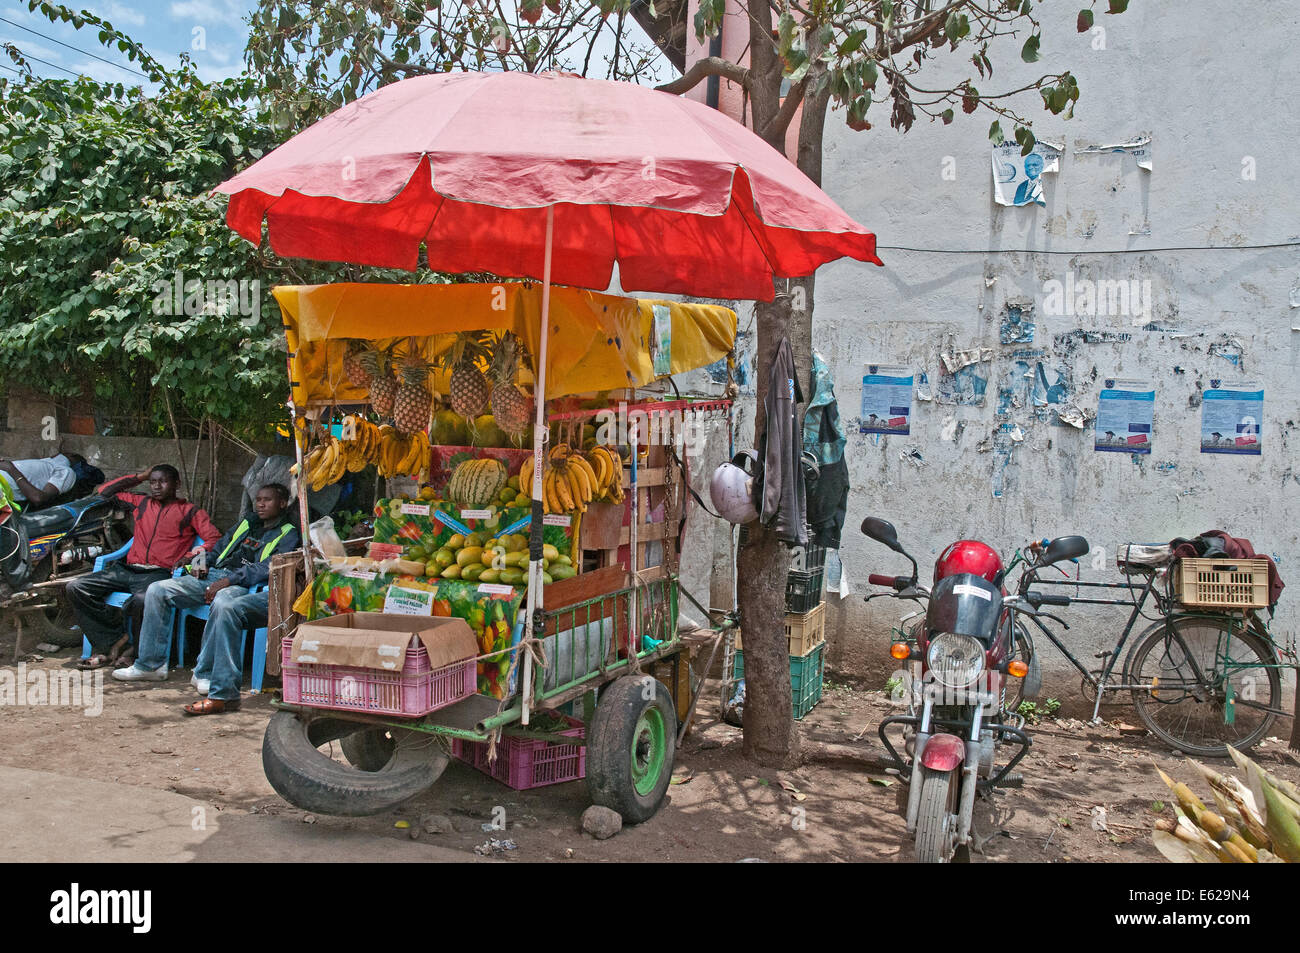 Roadside fruit and vegetable stall with umbrella shade in Nairobi South C district Kenya Africa Stock Photo